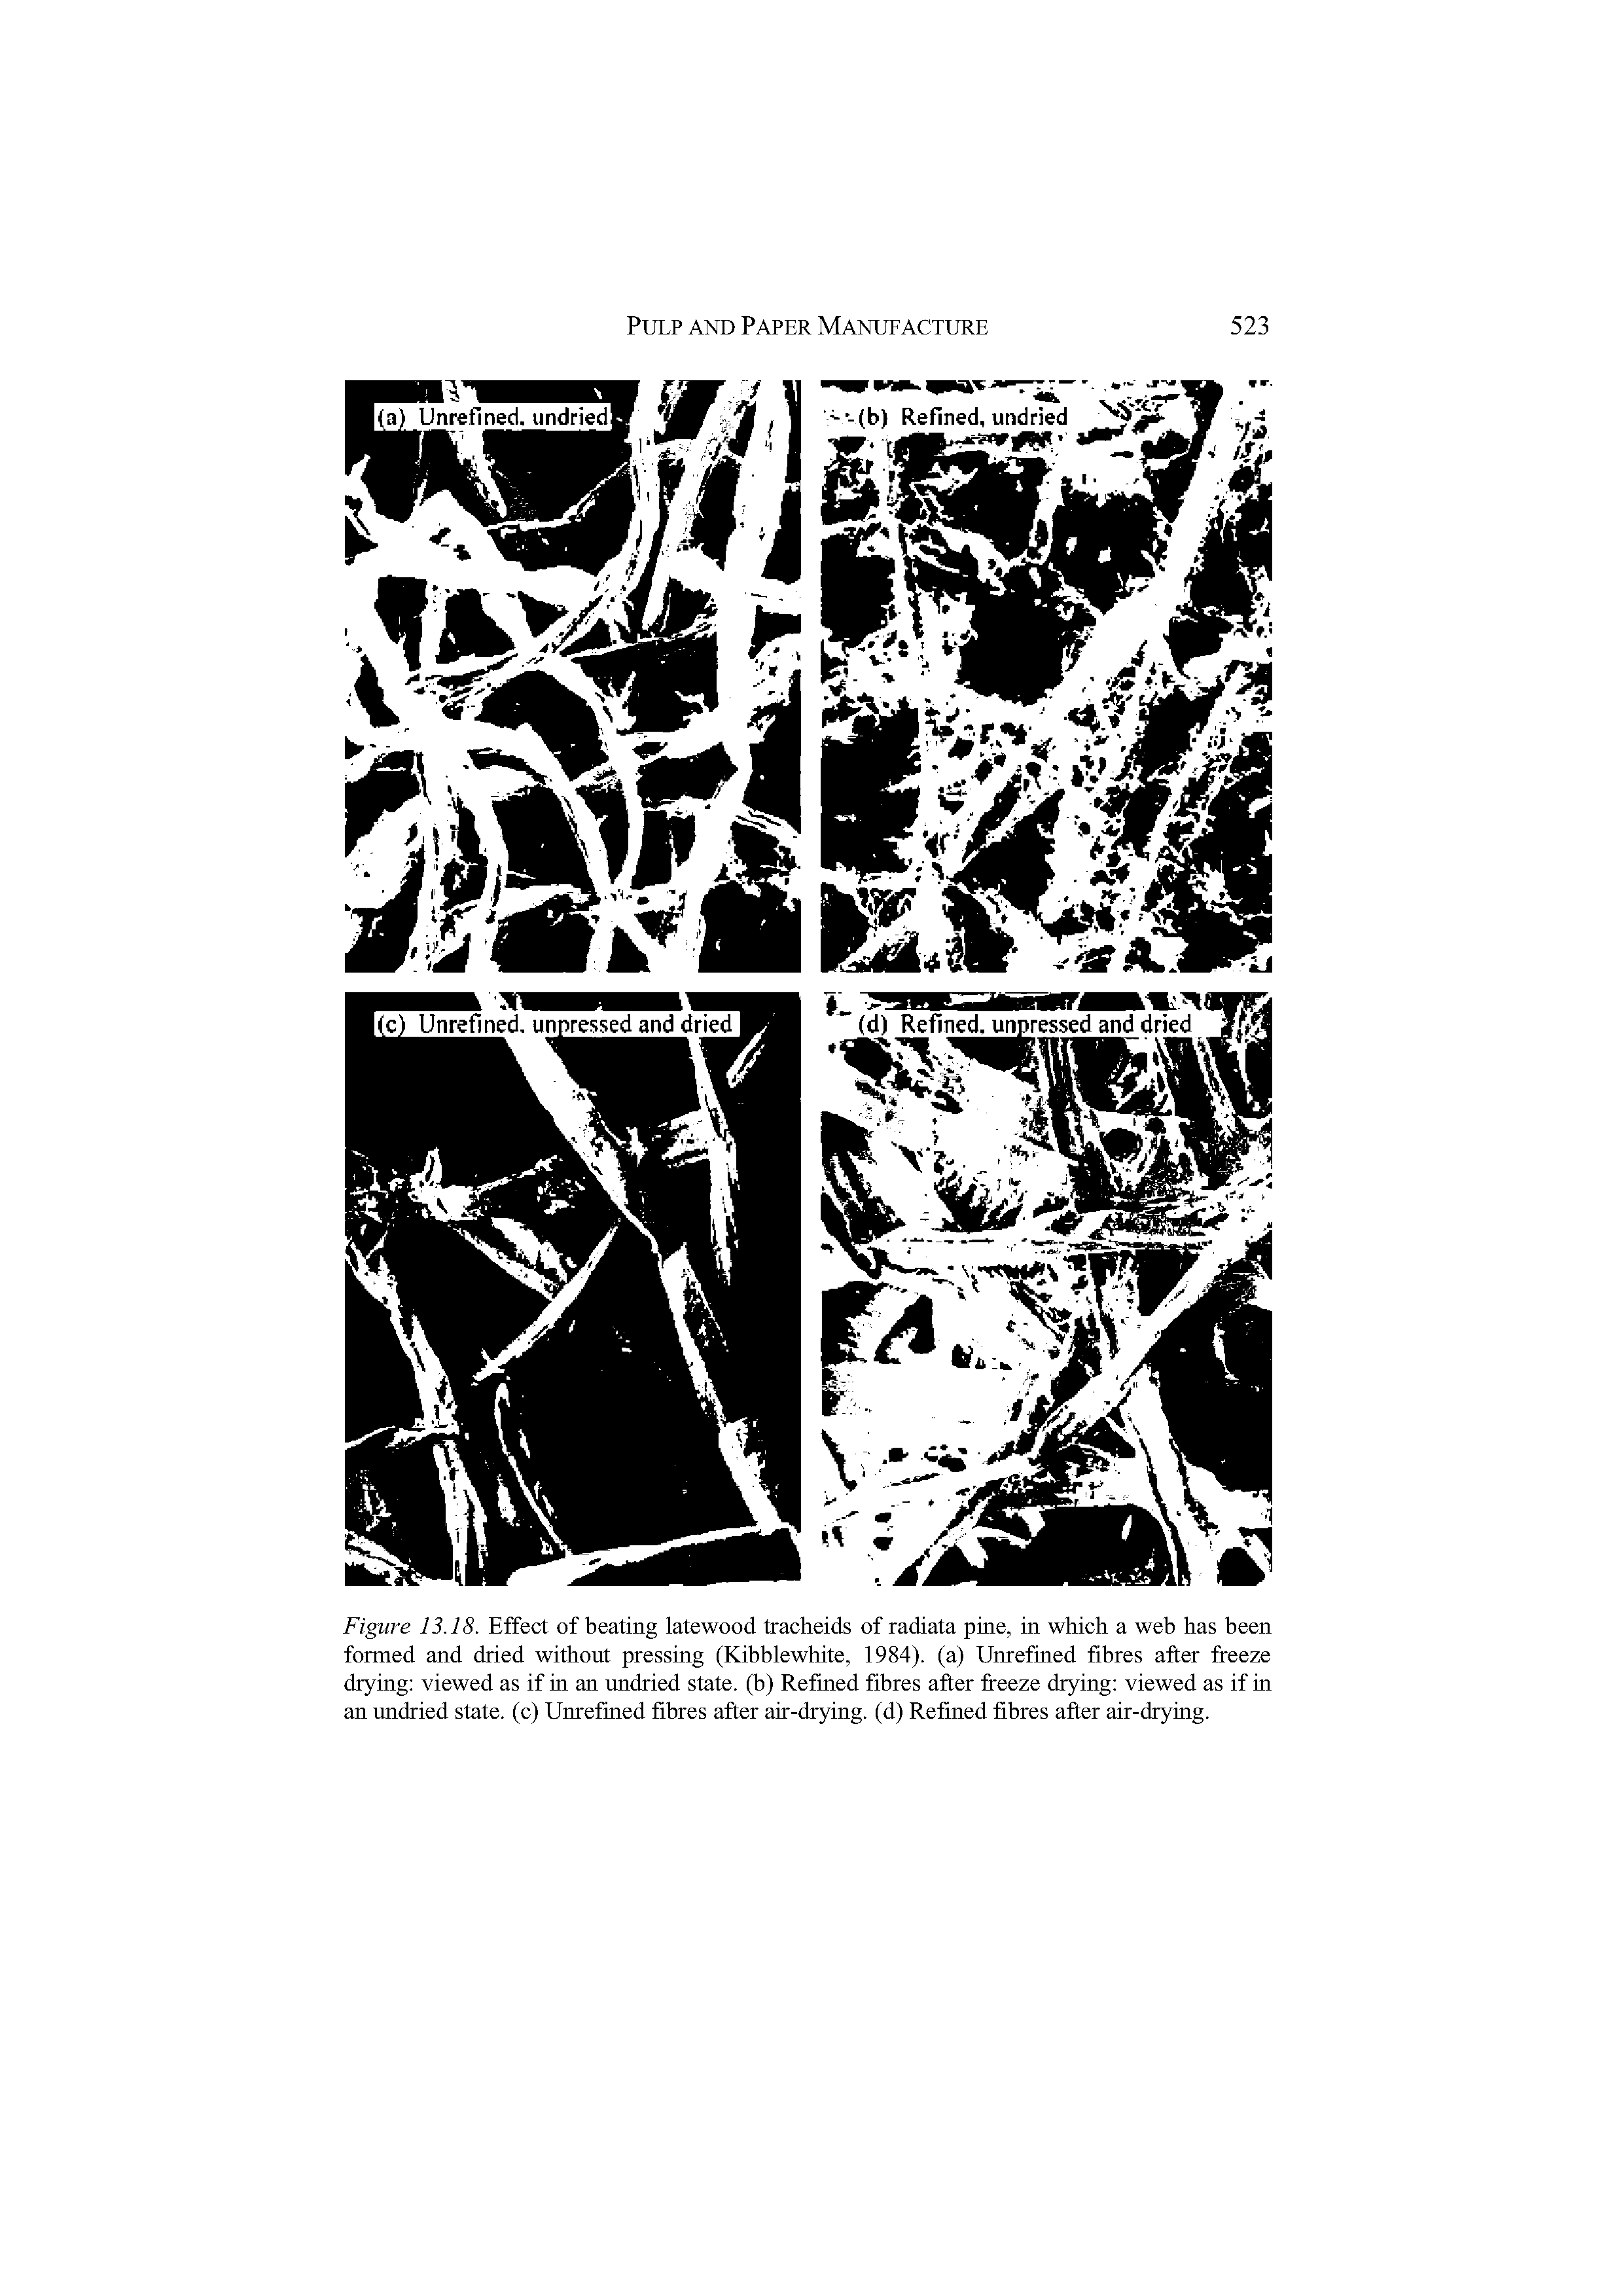 Figure 13.18. Effect of beating latewood tracheids of radiata pine, in which a web has been formed and dried without pressing (Kihhlewhite, 1984). (a) Unrefined fibres after freeze drying viewed as if in an undried state, (h) Refined fibres after freeze drying viewed as if in an undried state, (c) Unrefined fibres after air-drying, (d) Refined fibres after air-drying.